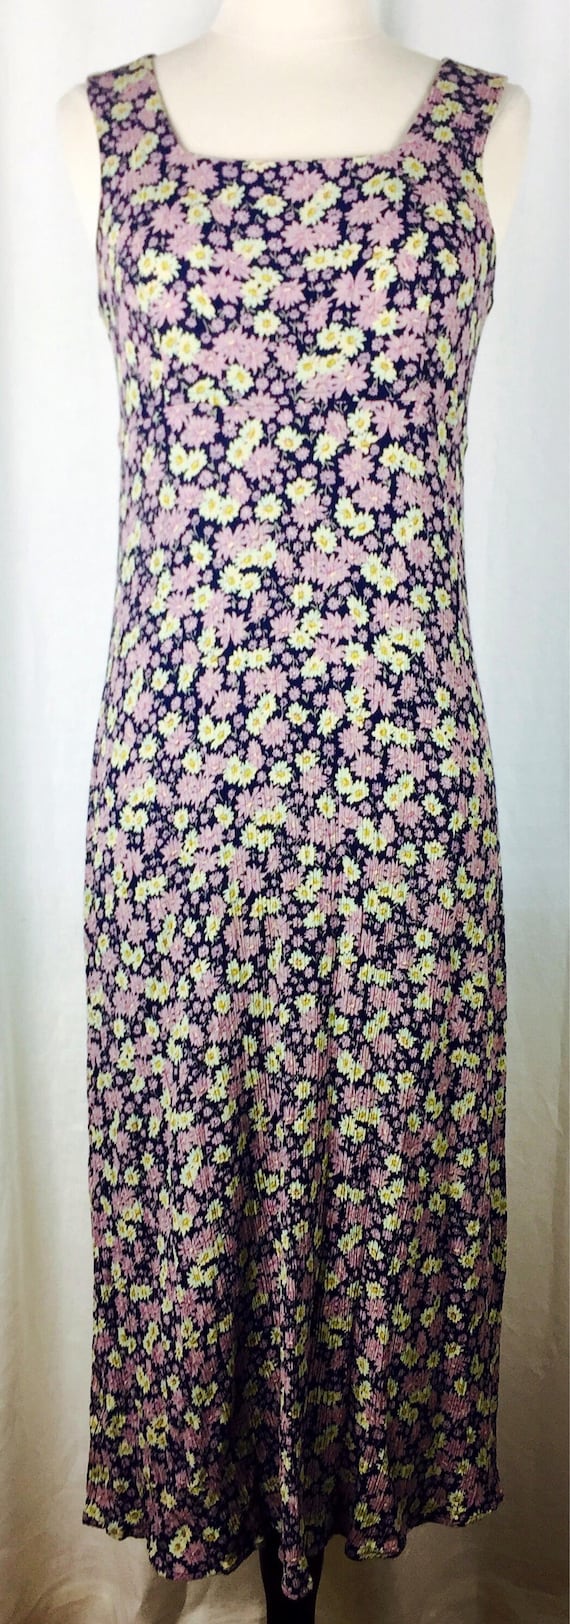 HOLD Vintage 90's navy purple daisy print floral r